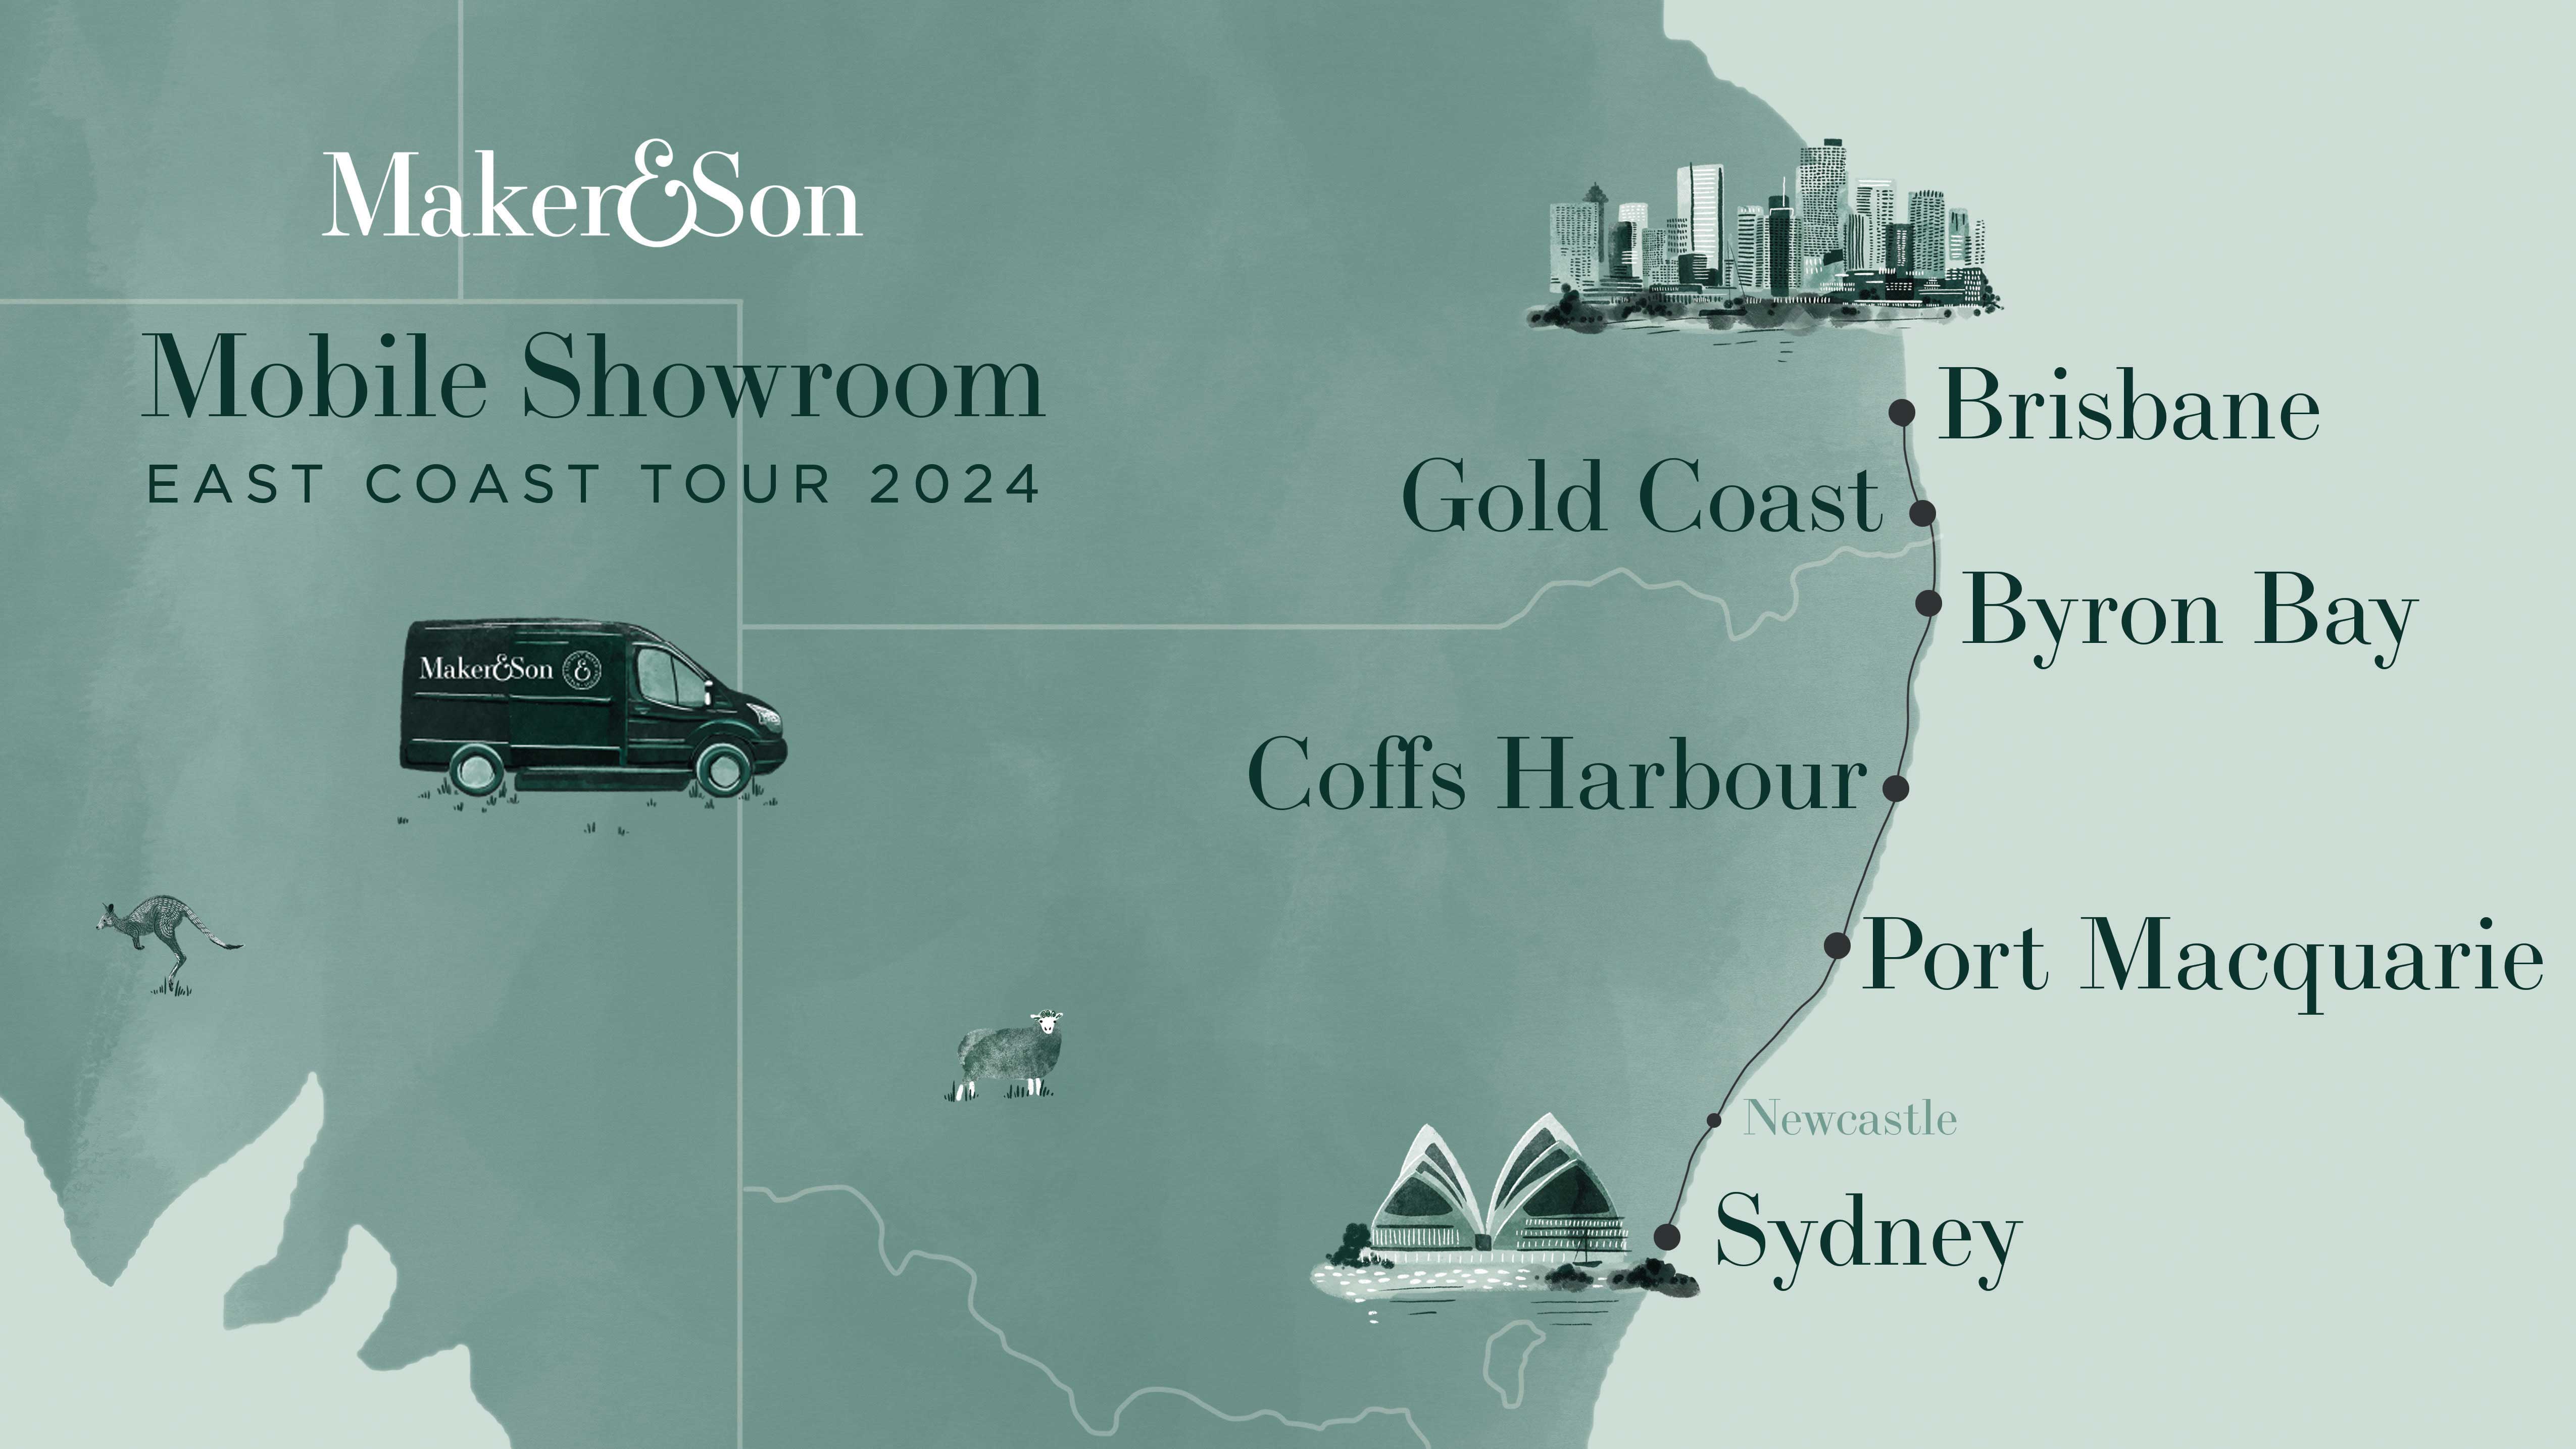 A map of the Eastern Coast of Australia showing the road tour Maker and Son's mobile showroom will travel. From Sydney to Brisbane and back.